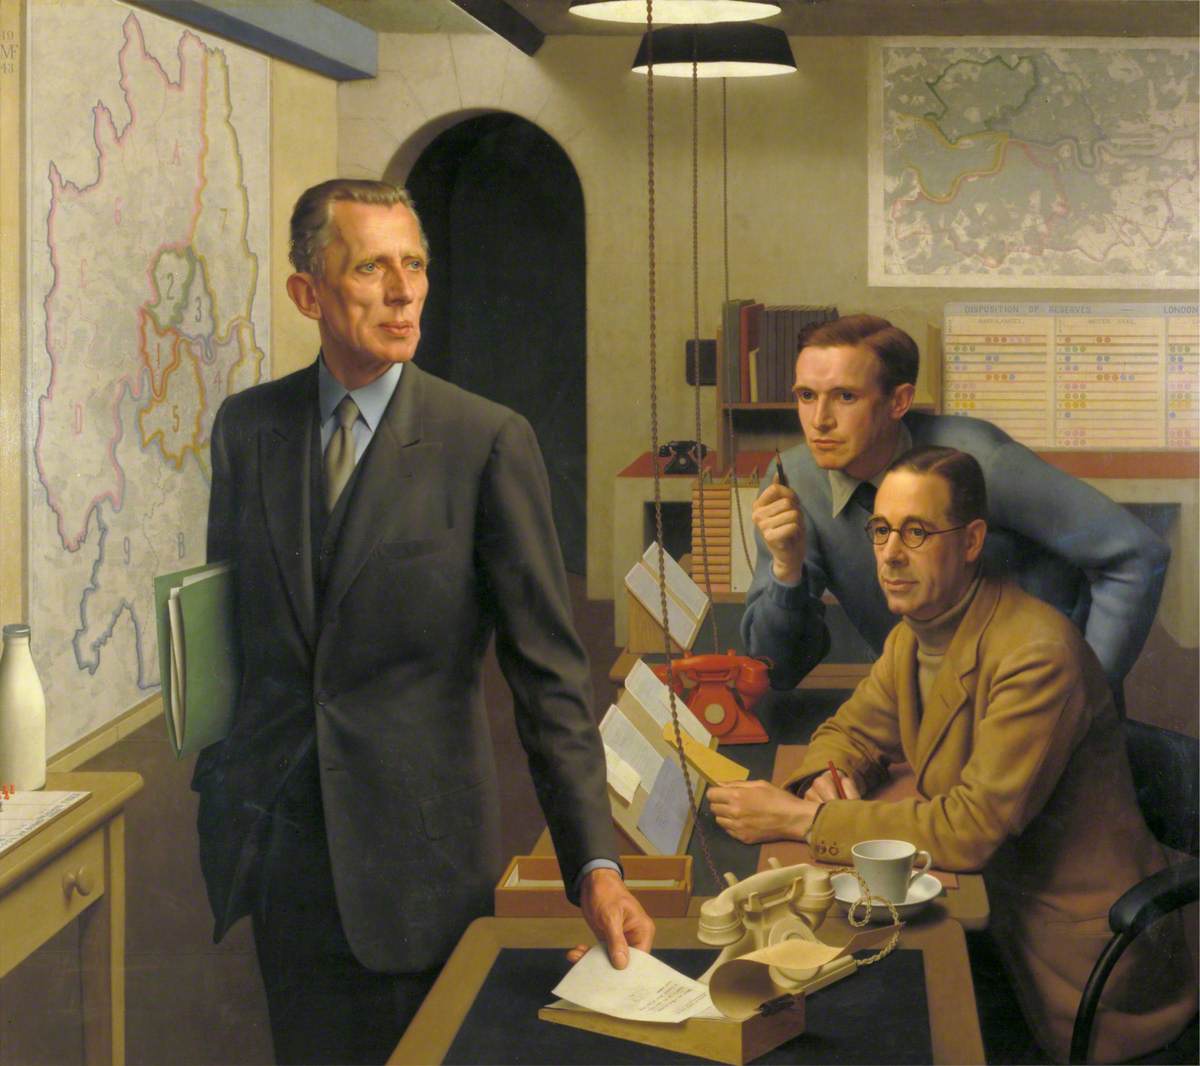 Sir Ernest Gowers (1880–1966), KCB, KBE, Senior Regional Commissioner for London, Lieutenant Colonel A. J. Child, OBE, MC, Director of Operations and Intelligence, and K. A. L. Parker, Deputy Chief Administrative Officer, in the London Regional Civil Defence Control Room